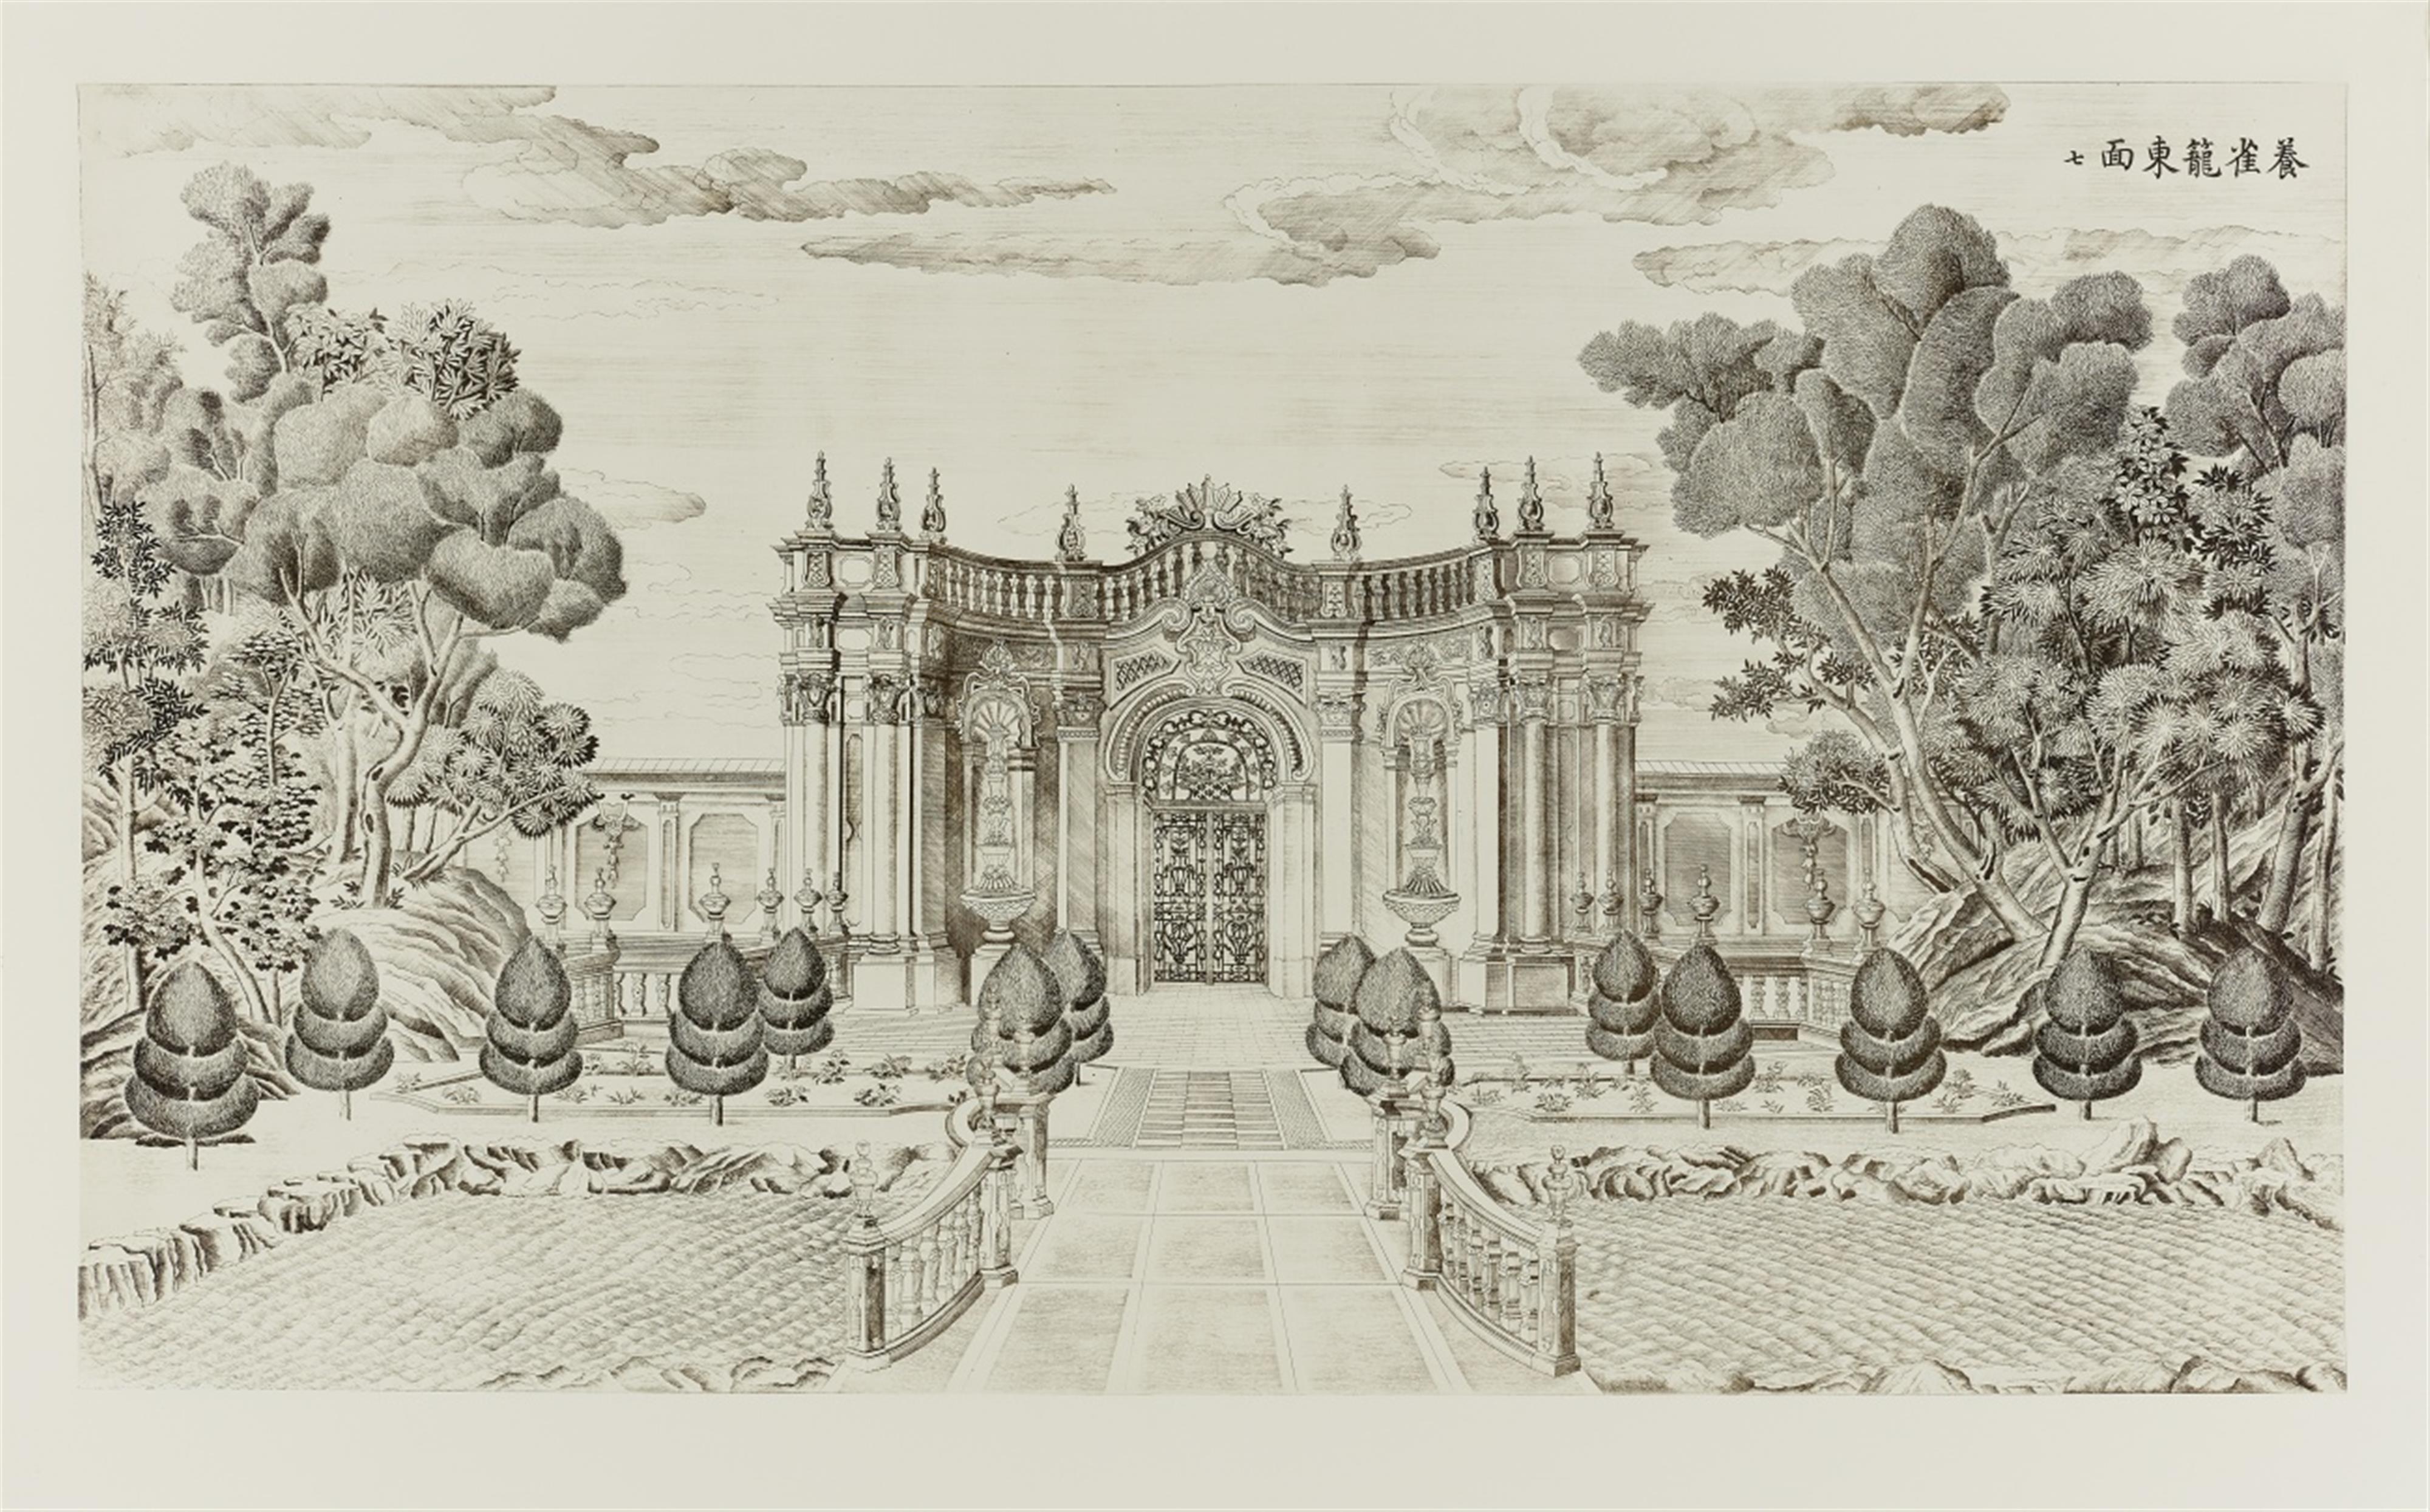 After Yi Lantai . 20th century - Sixteen etchings on wove paper depicting palaces, pavilions and gardens created by Giuseppe Castiglione in the Xiyang Lou (Western mansions) on the imperial grounds of the Old S... - image-1